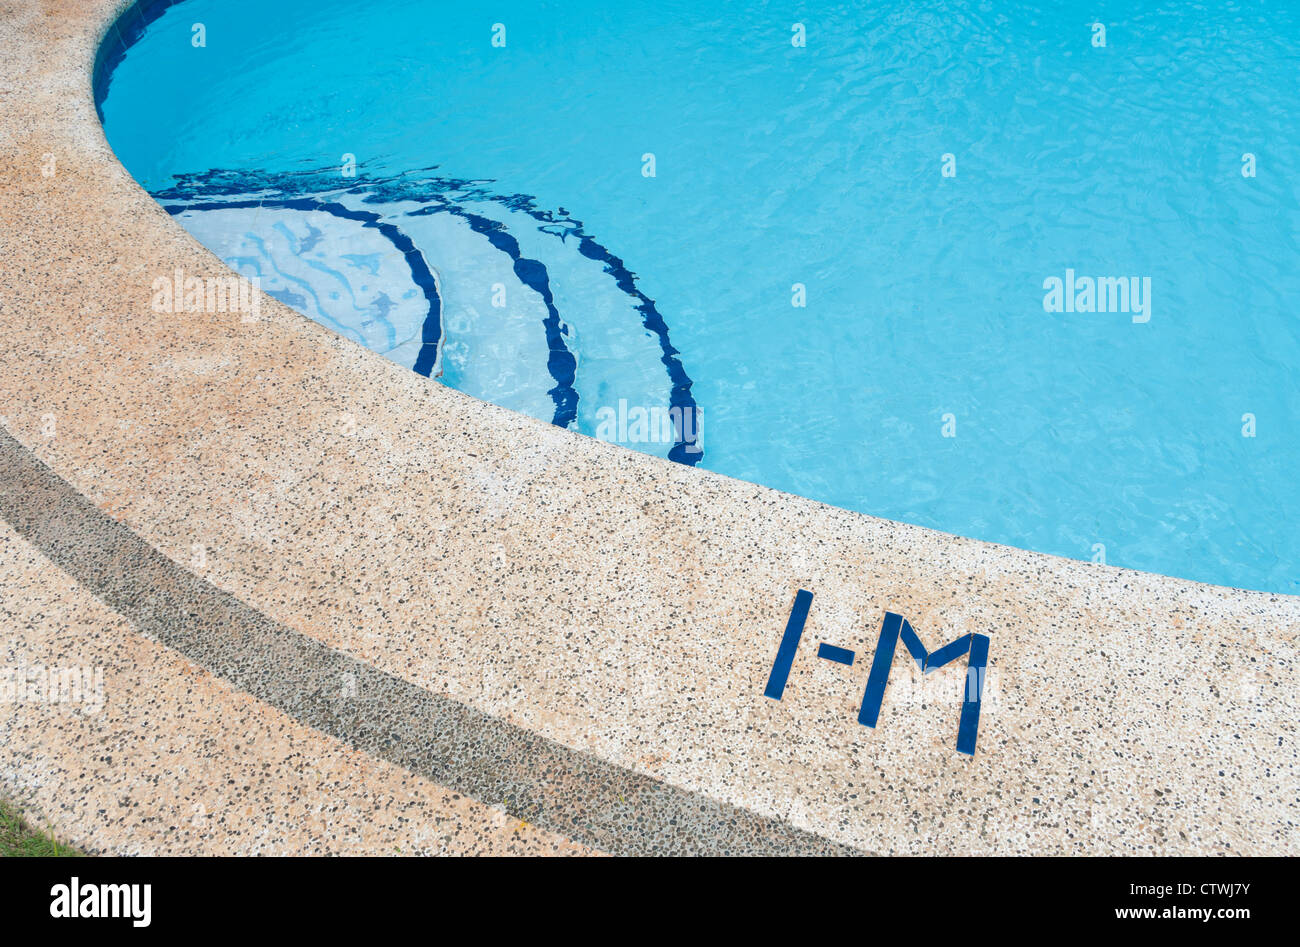 edge of swimming pool with one meter water depth sign Stock Photo